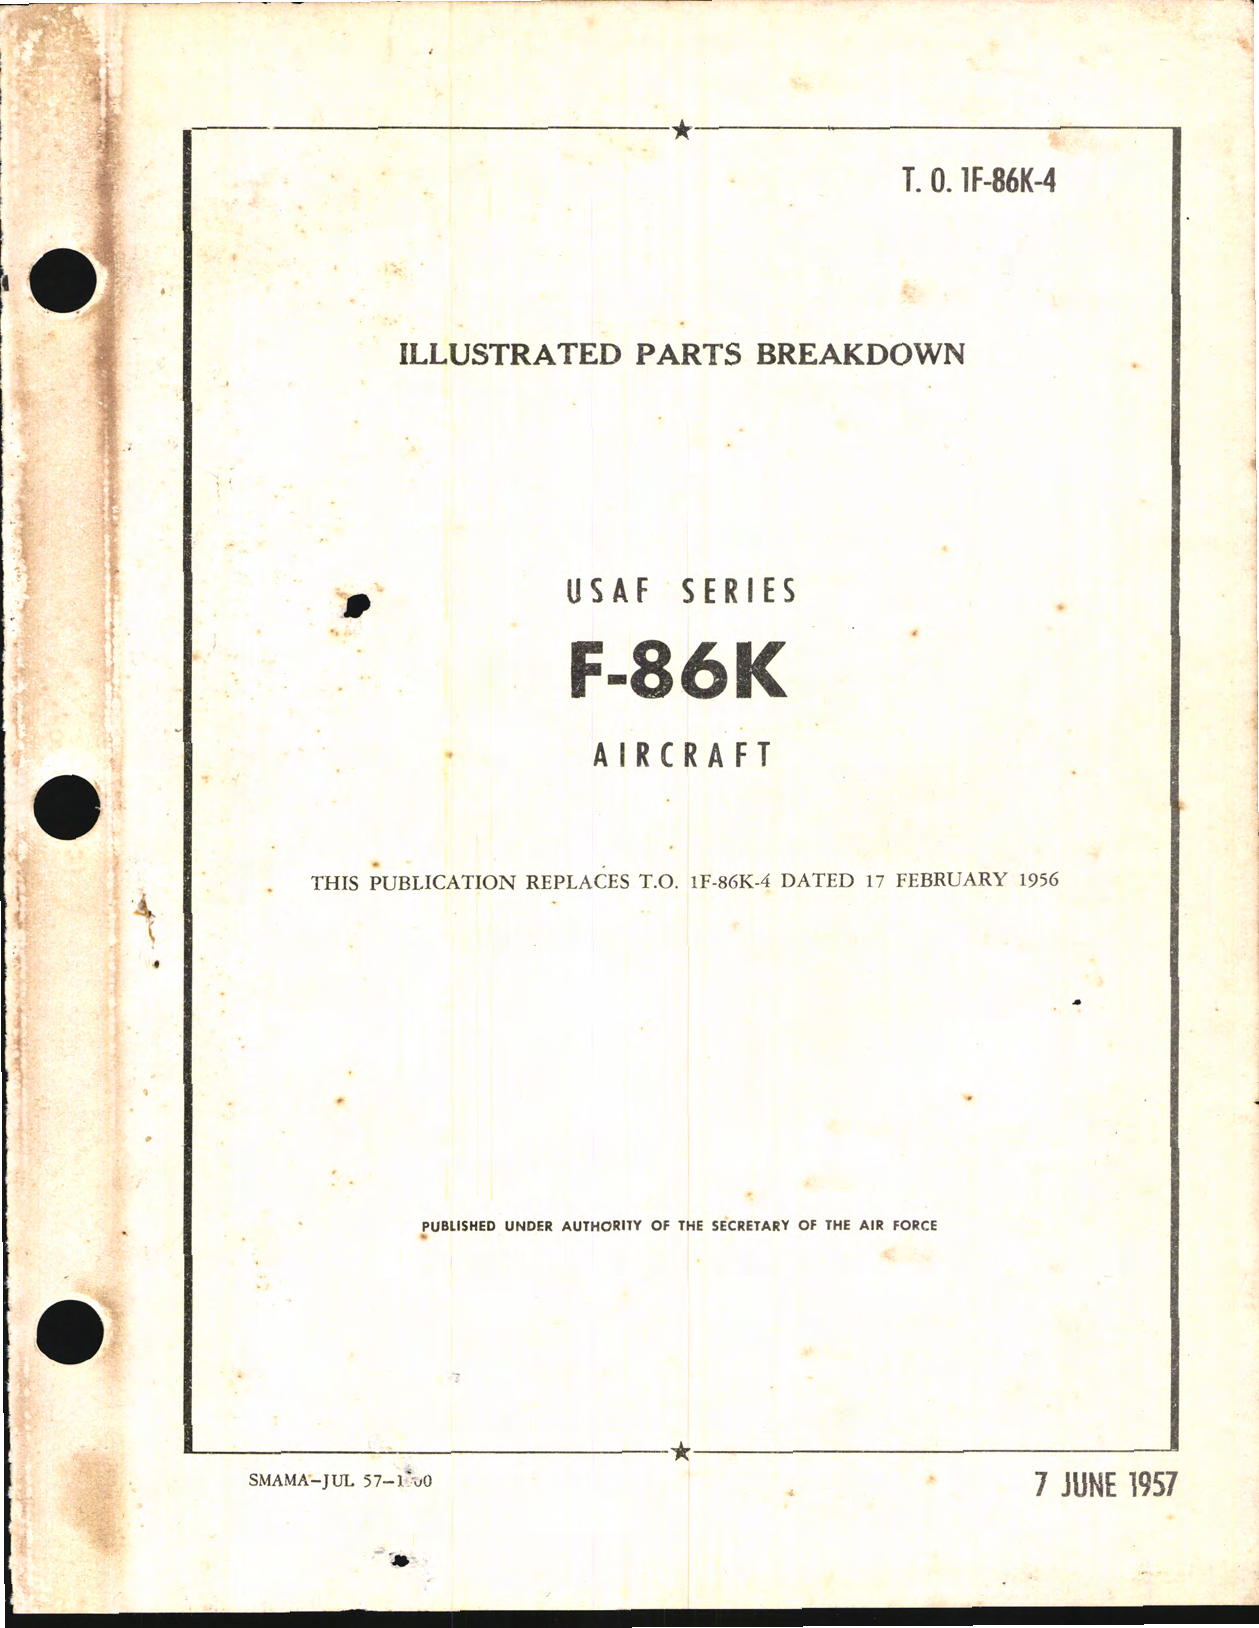 Sample page 1 from AirCorps Library document: Illustrated Parts Breakdown for F-86K Aircraft